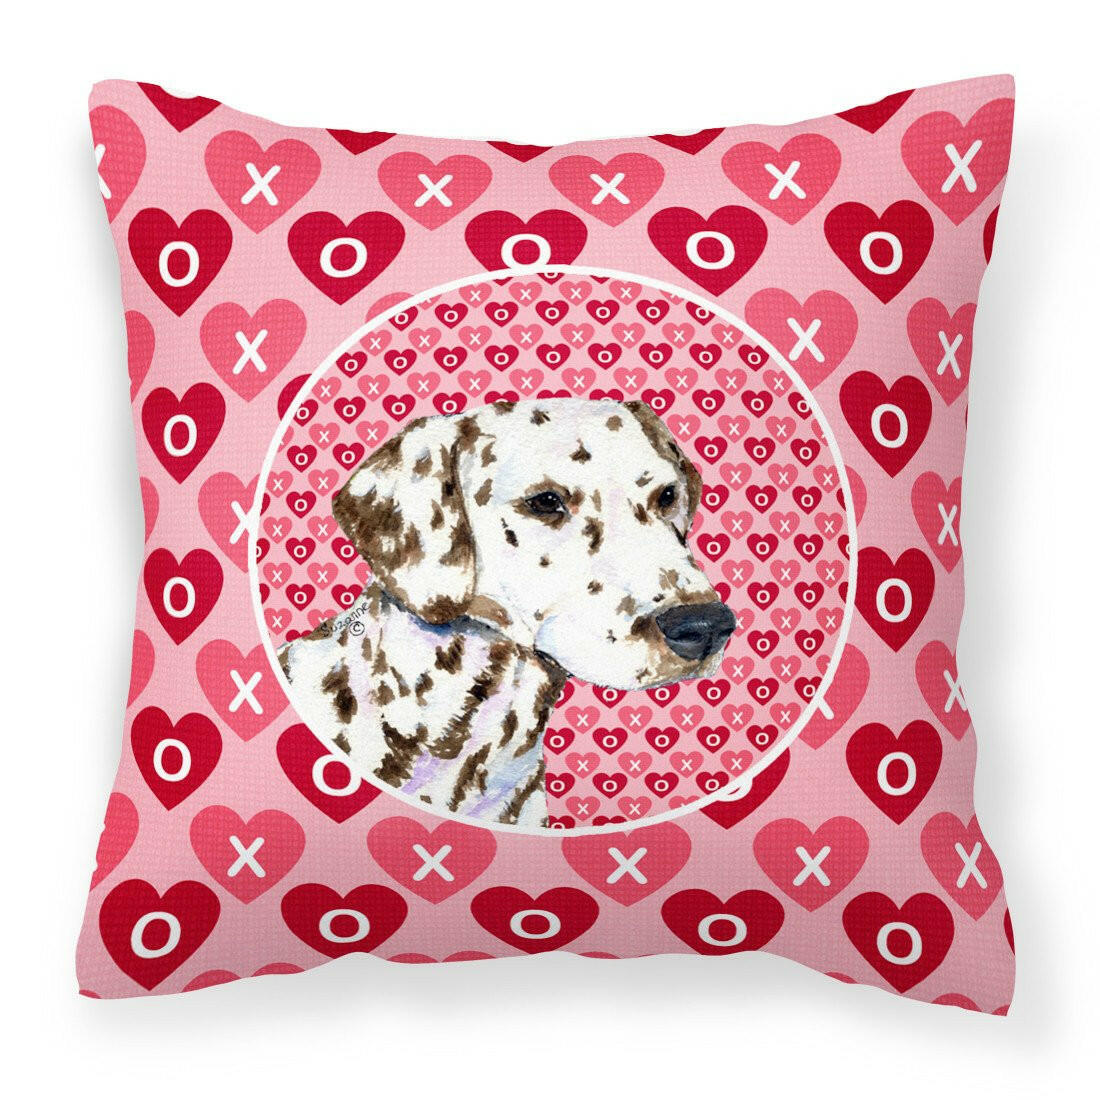 Dalmatian Hearts Love and Valentine's Day Portrait Fabric Decorative Pillow SS4469PW1414 by Caroline's Treasures